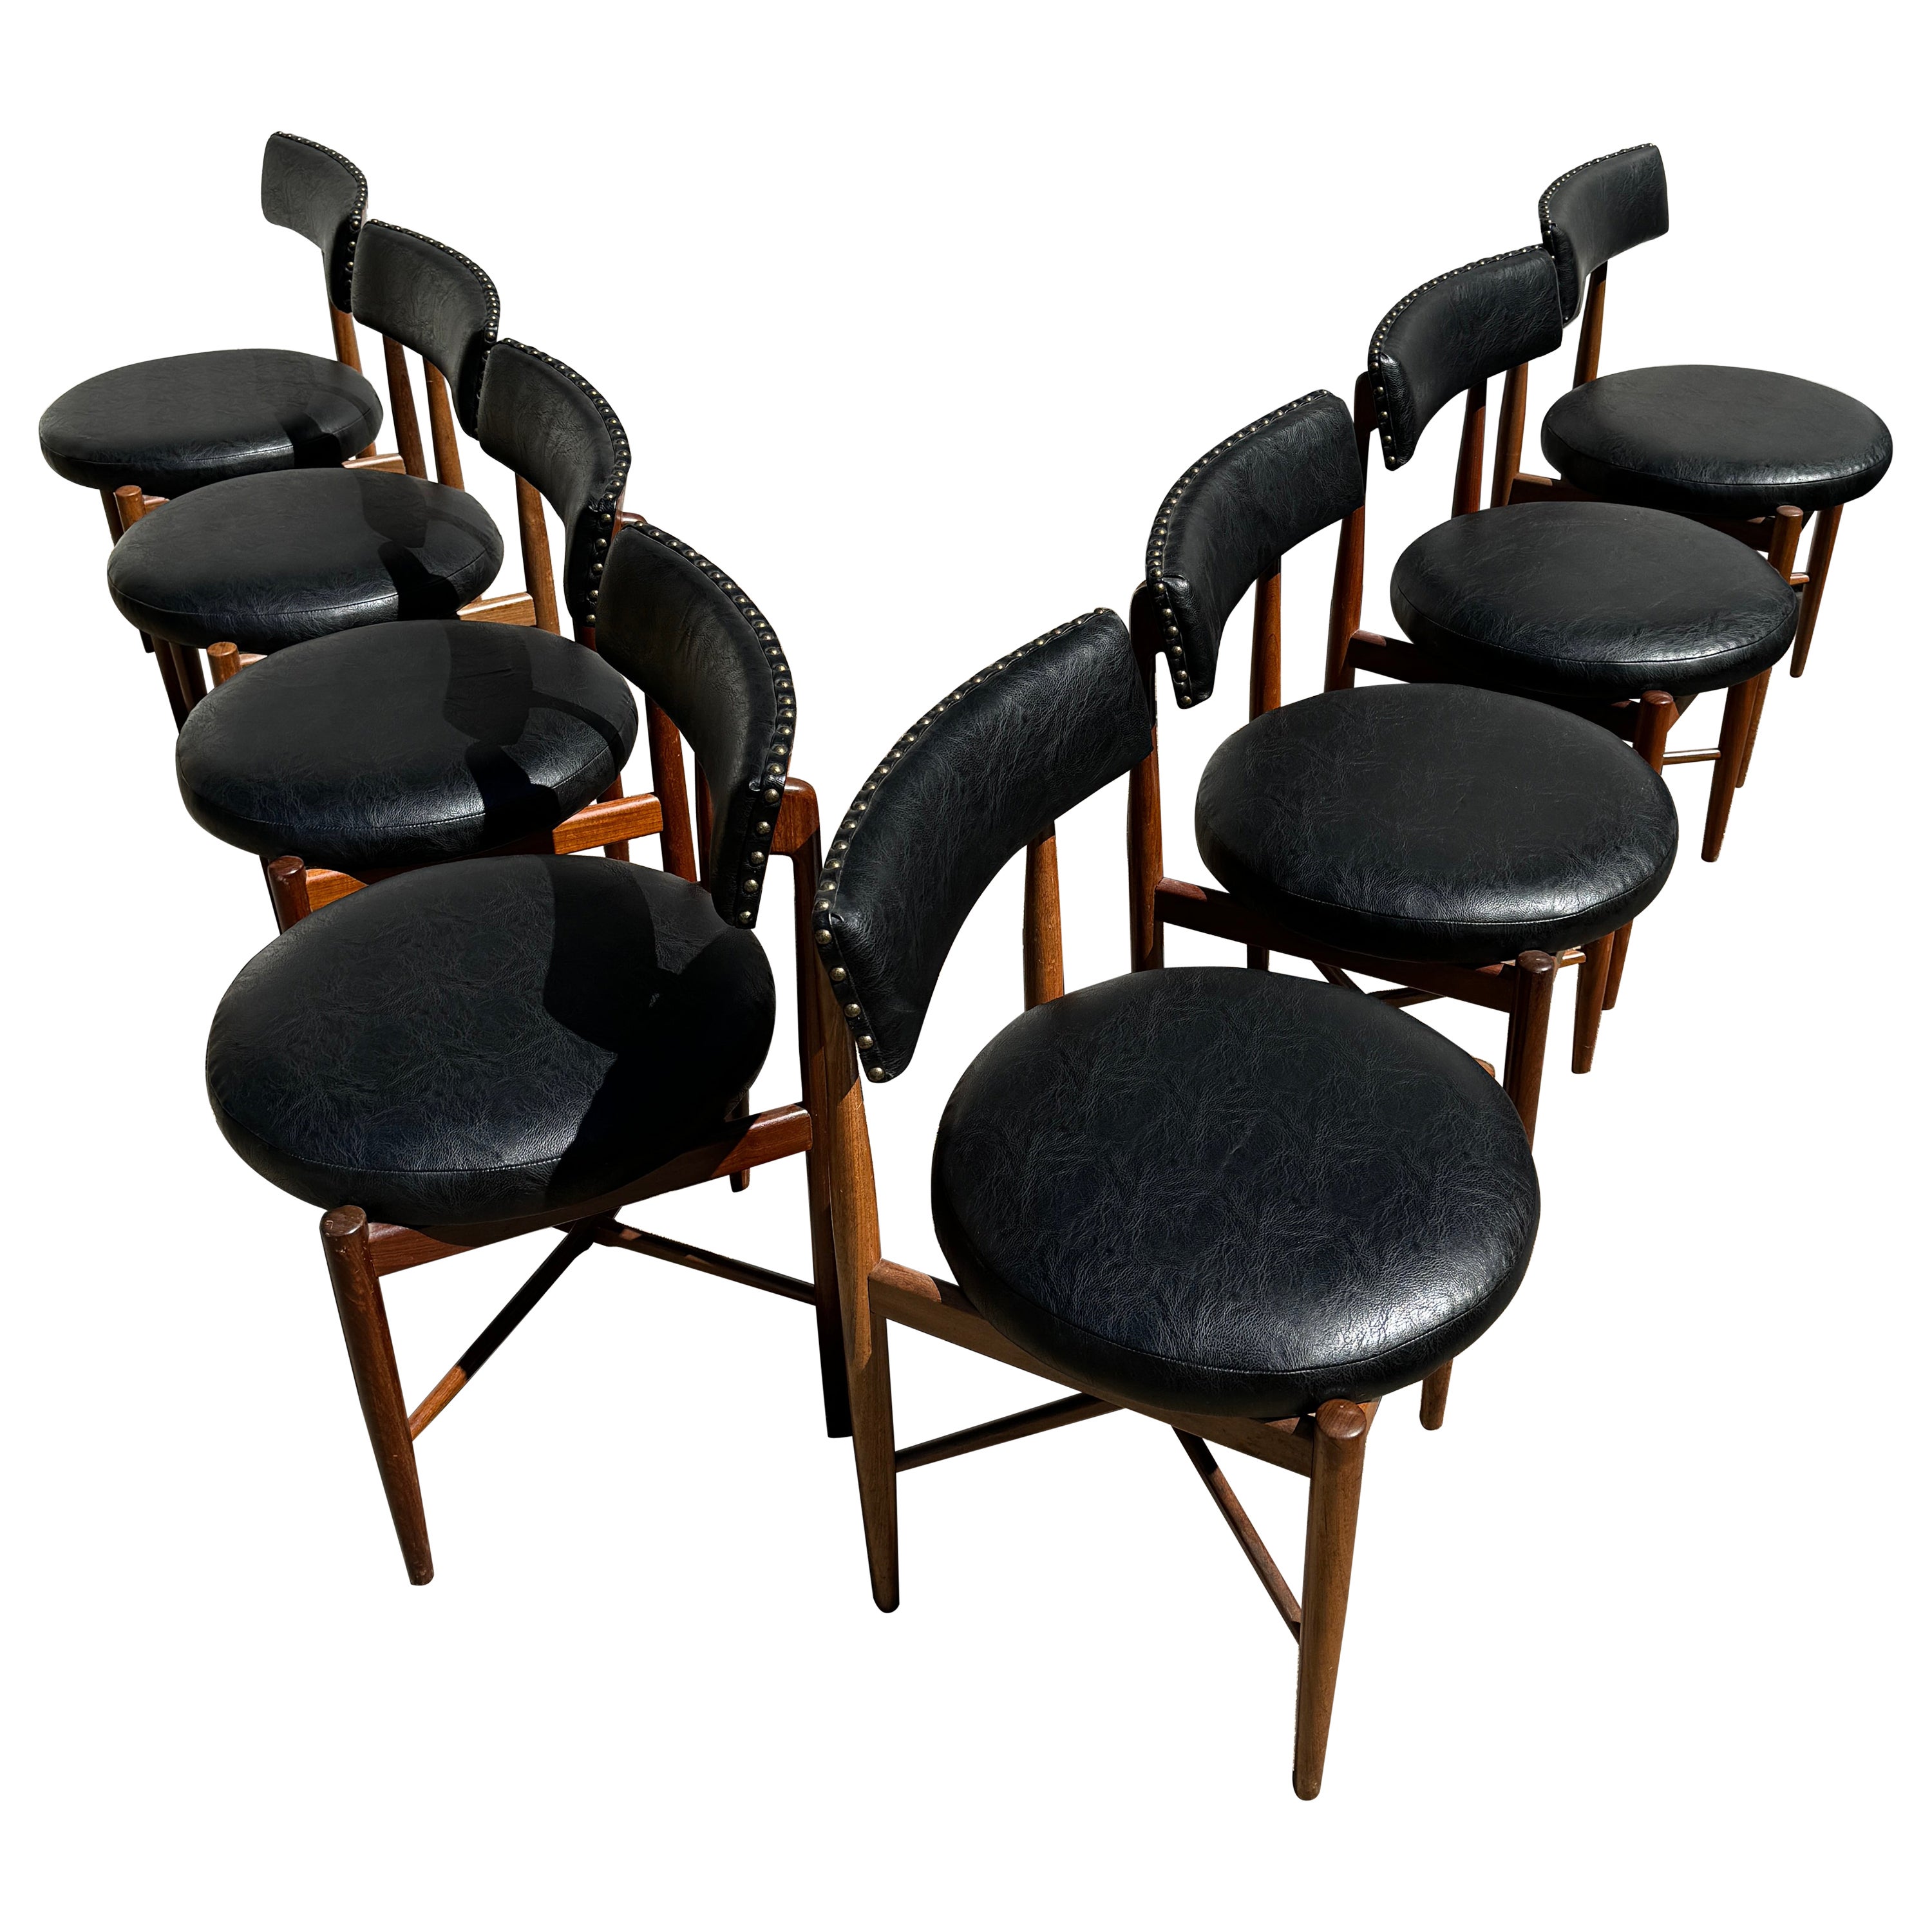 mid century modern set of 8 dining chairs by Victor Bramwell Wilkins for G plan